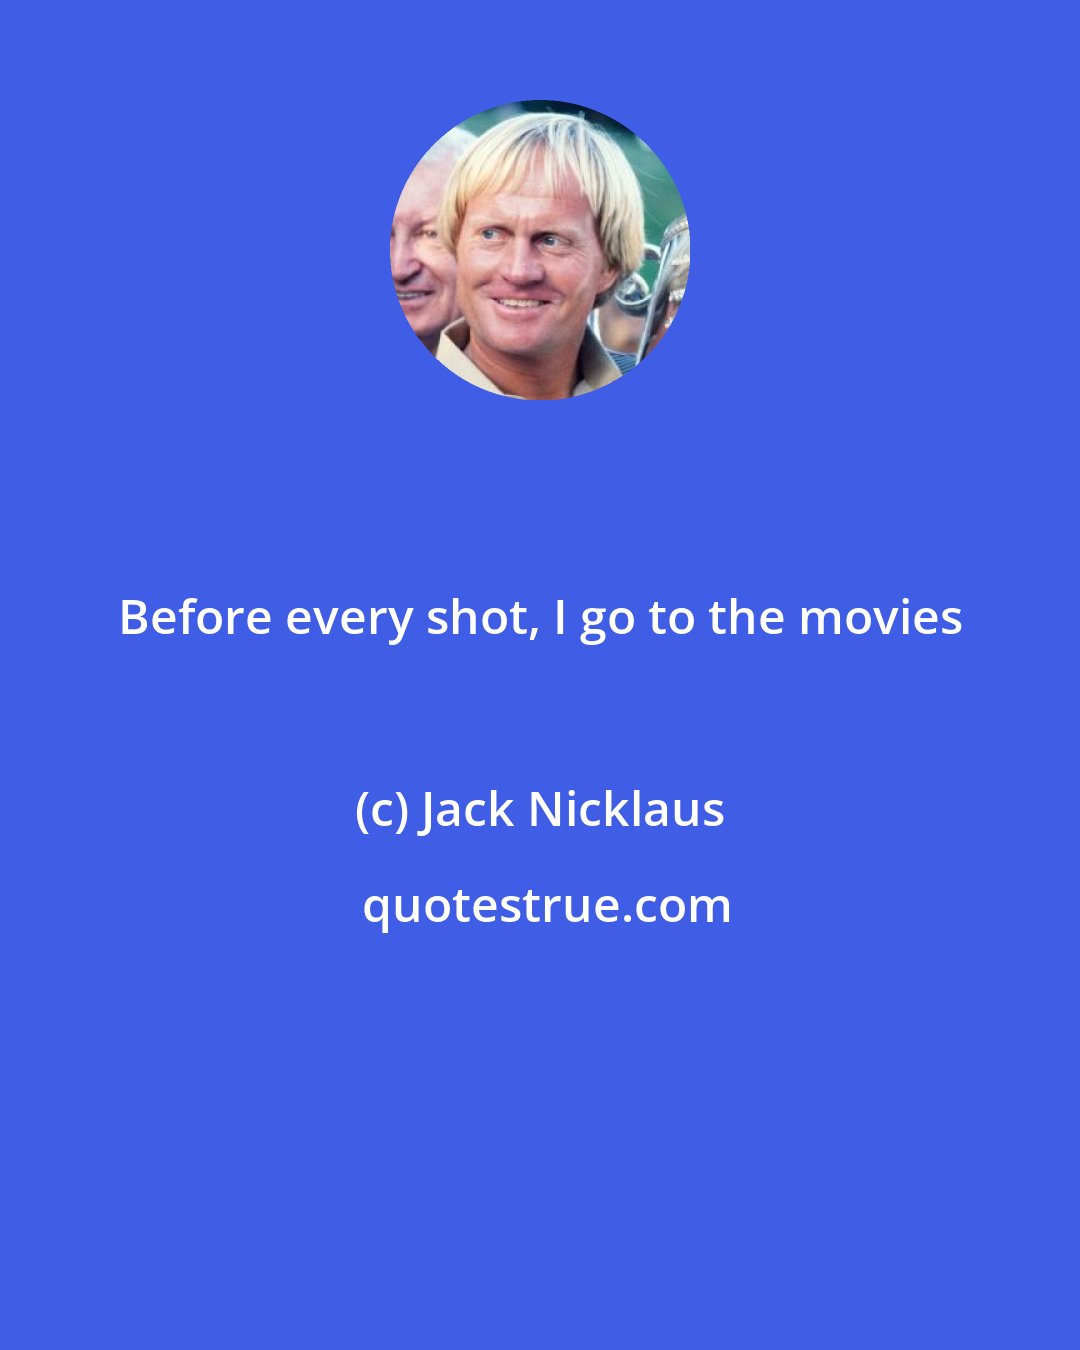 Jack Nicklaus: Before every shot, I go to the movies